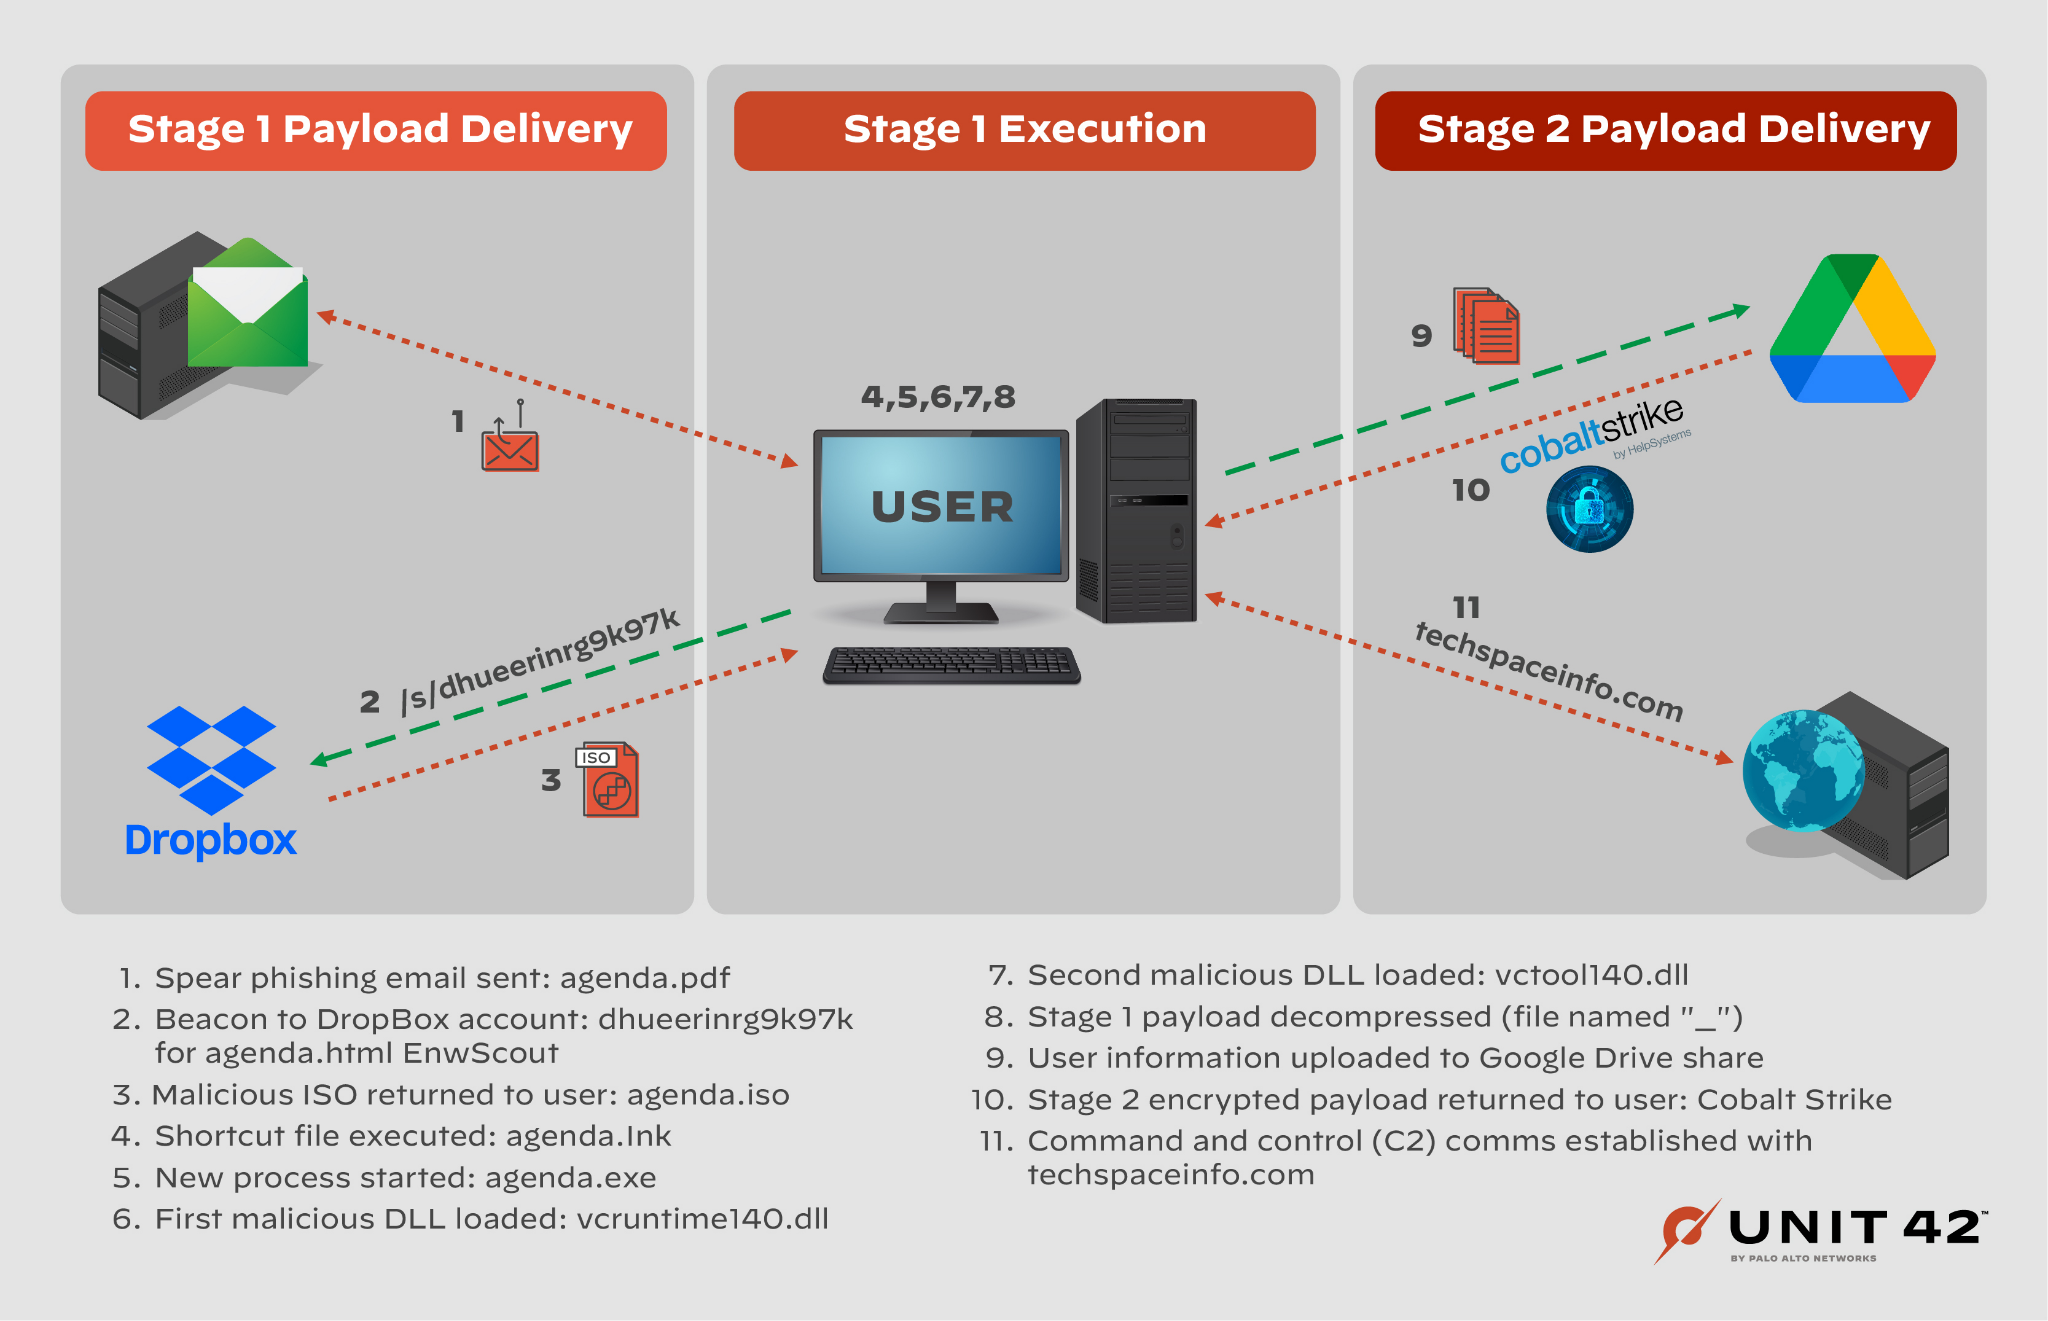 Campaign 1 overview. The infographic covers stage 1 payload delivery, stage 1 execution and stage 2 payload delivery. Steps: 1. Spear phishing email sent: agenda.pdf, 2. Beacon to DropBox account: dhueerinrg9k97k for agenda.html EnvyScout, 3, malicious ISO returned to user: agenda.iso, 4. shortcut file executed: agenda.lnk, 5. new process started: agenda.exe, 6. first malicious DLL loaded: vcruntime140.dll, 7. second malicious dll loaded: vctool140.dll, 8. stage 1 payload decompressed (file named "_"), 9. user information uploaded to Google Drive share, 10. stage 2 encrypted payload returned to user: Cobalt Strike, 11. command and control (C2) comms established with techspaceinfo[.]com